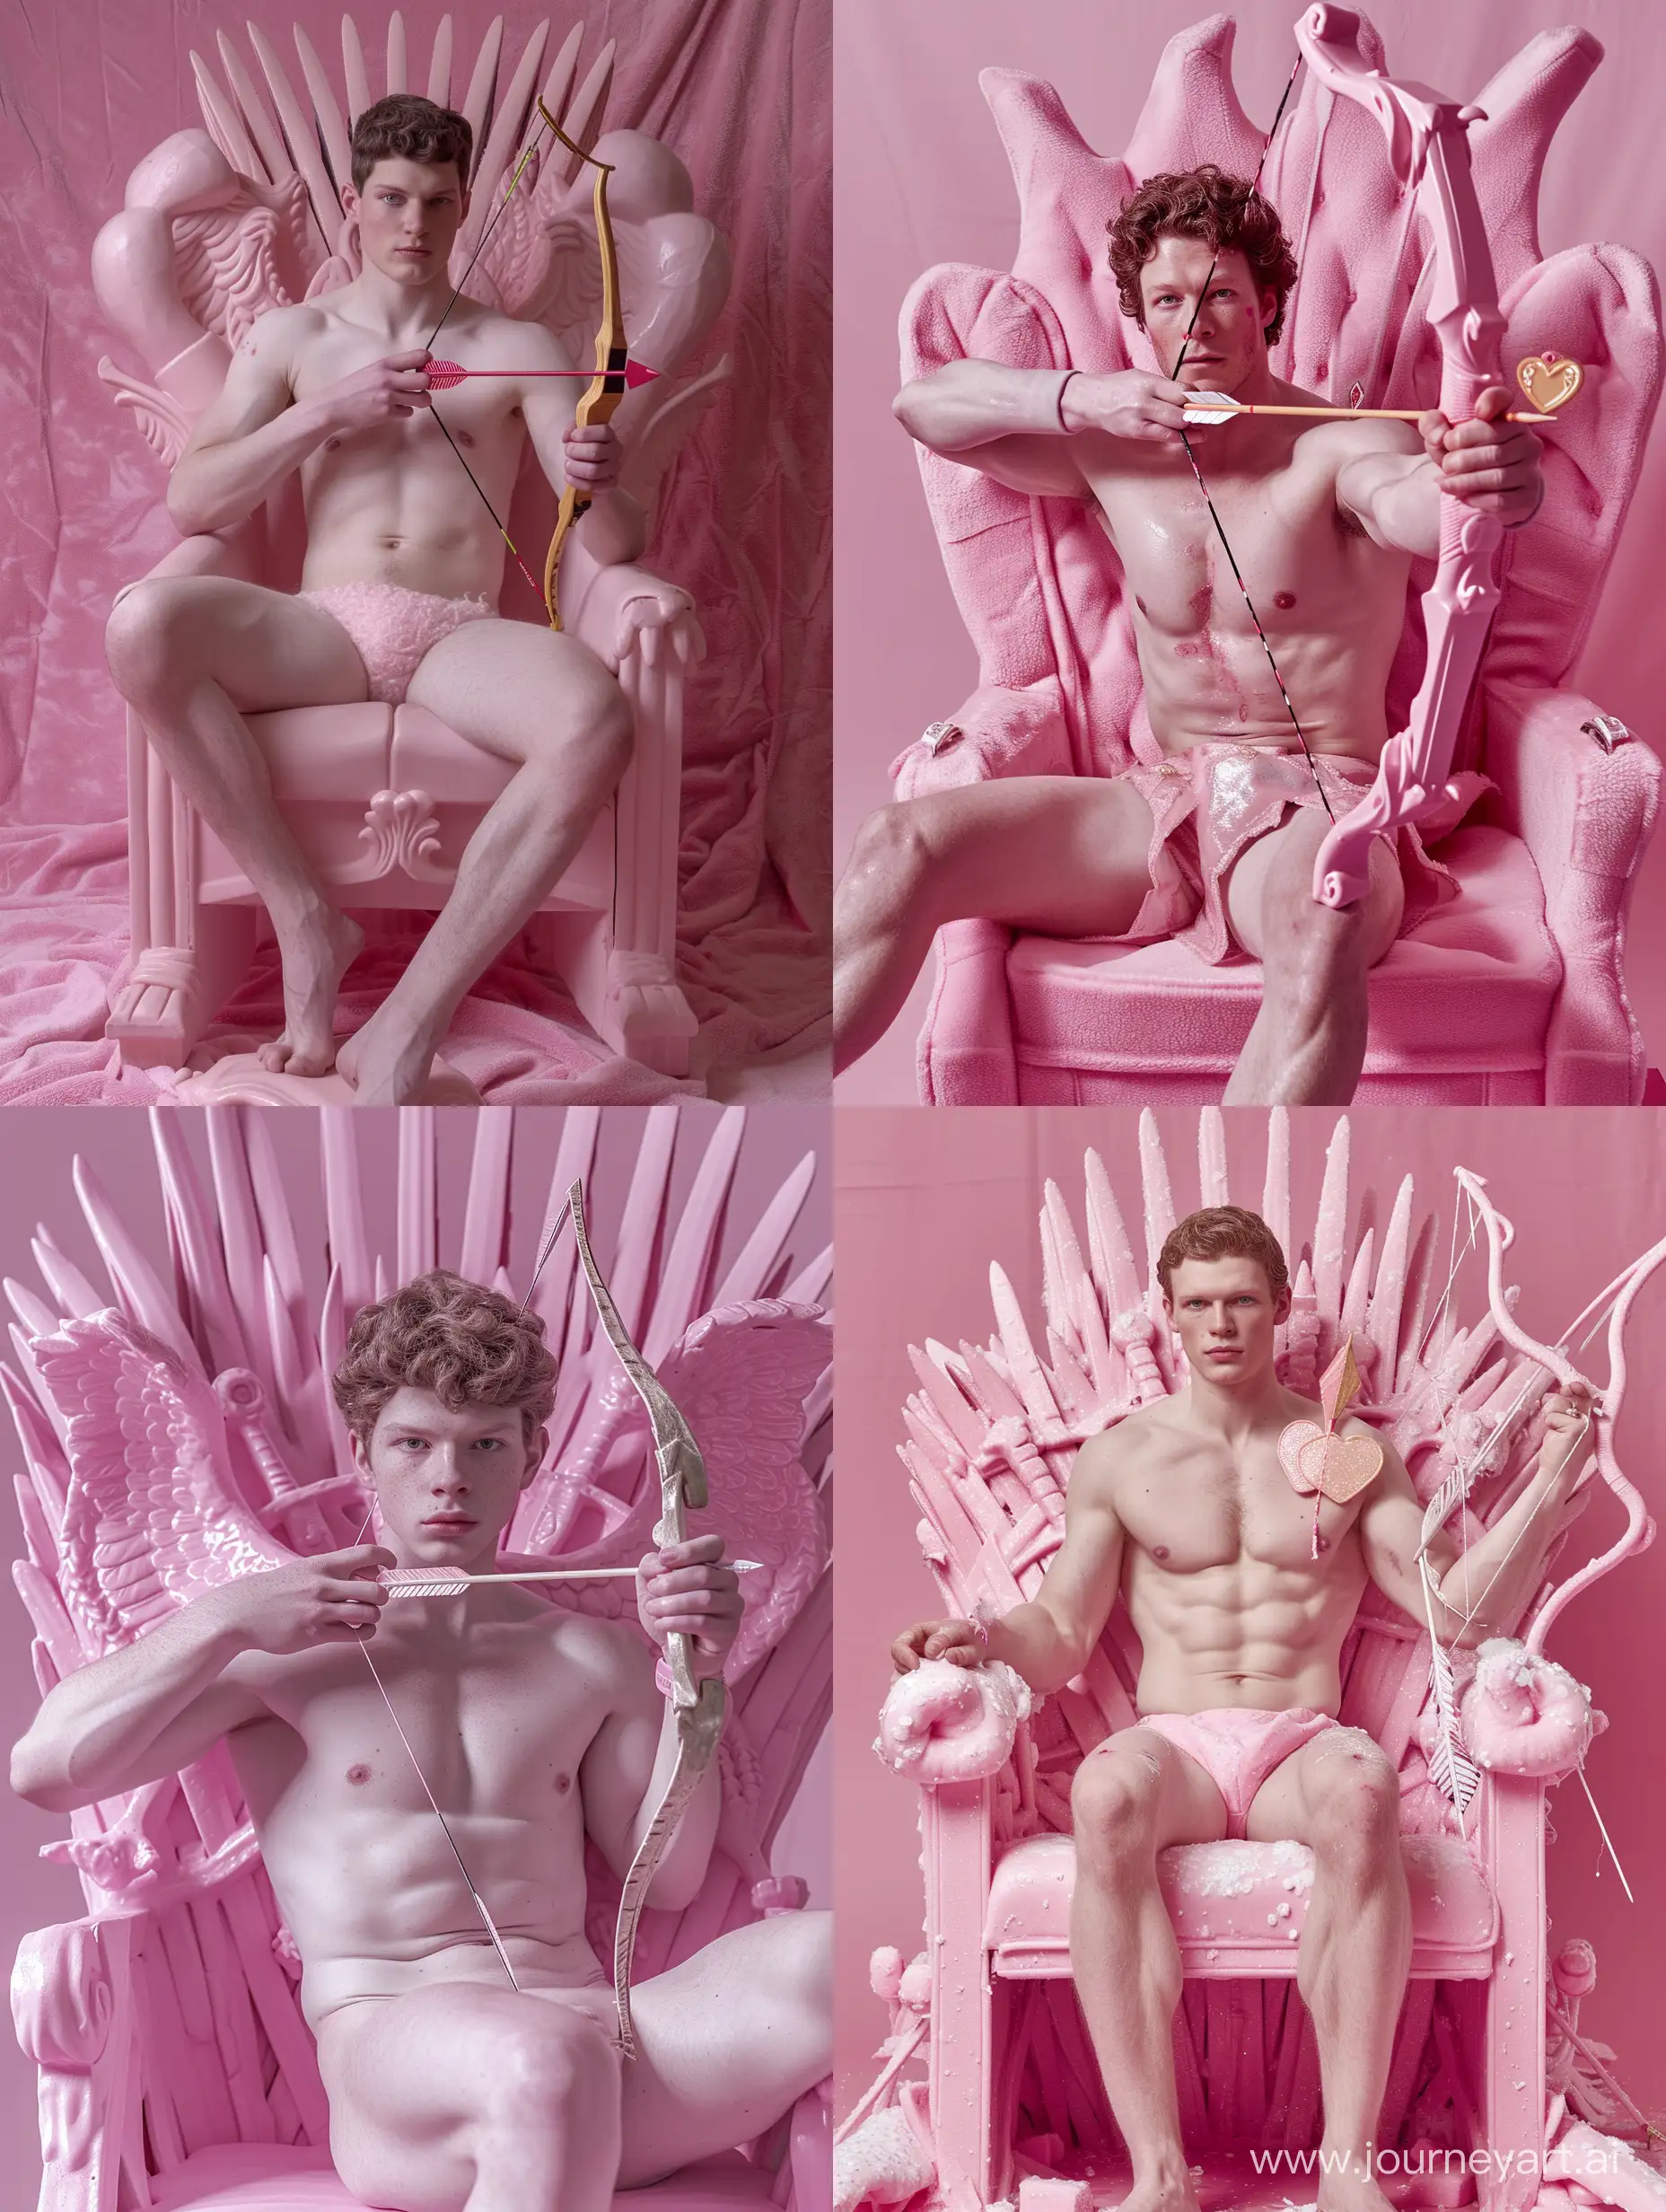 Cherubic-Cupid-Seated-on-Game-of-Thrones-Throne-with-HeartTipped-Arrow